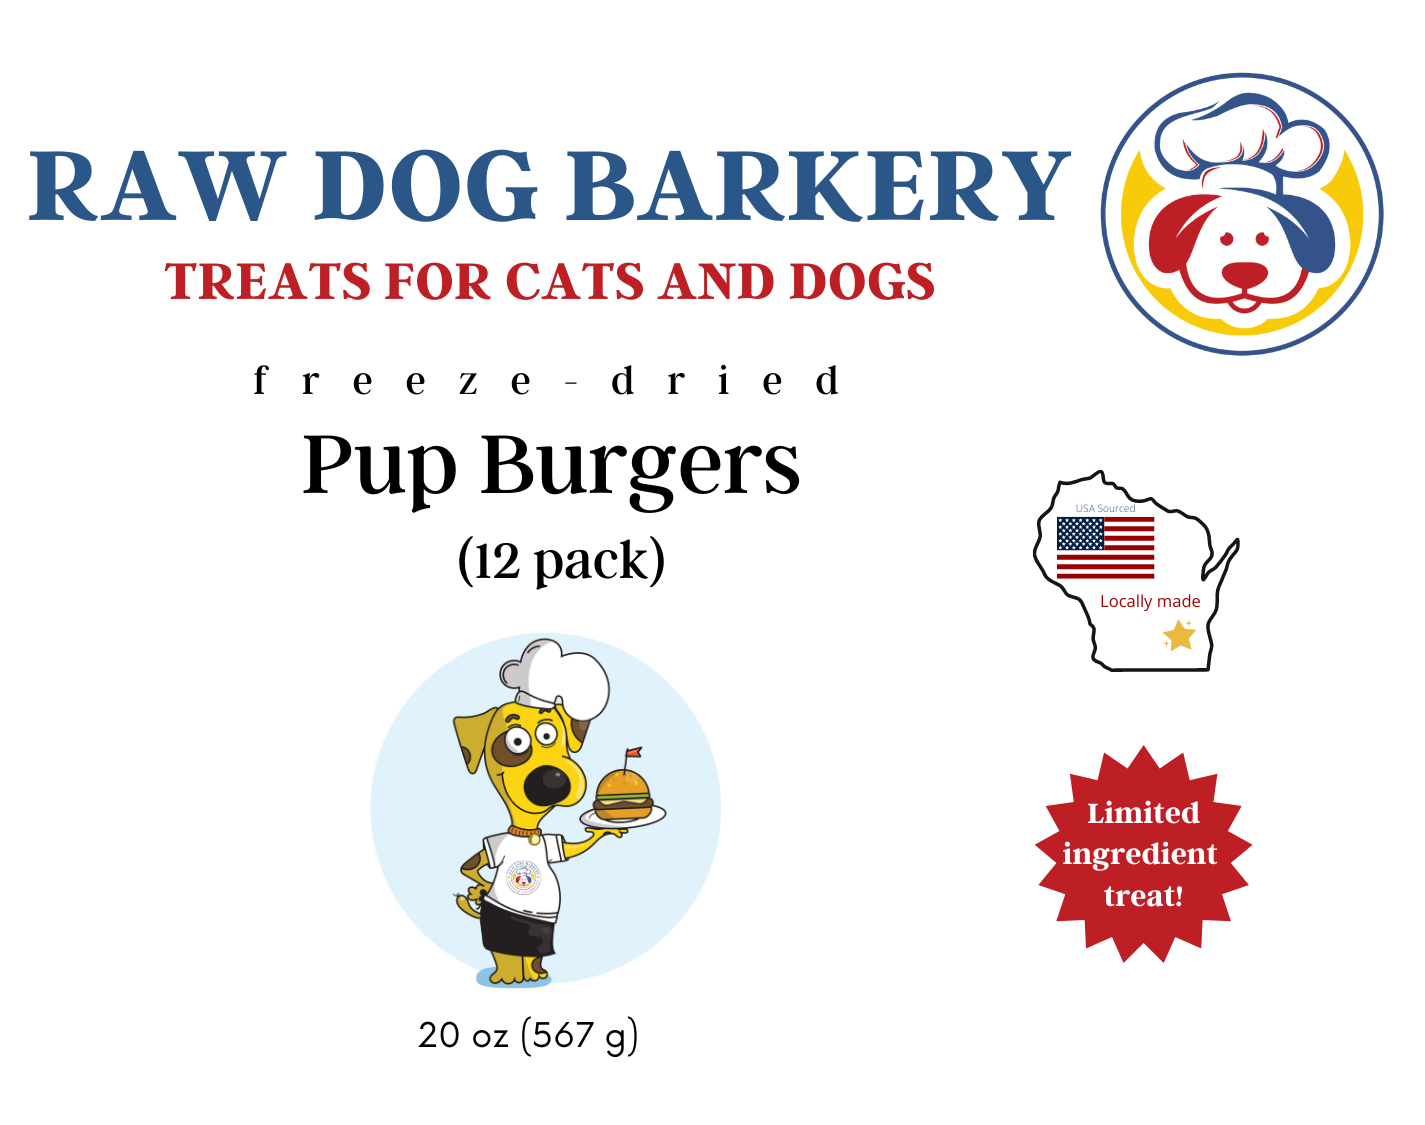 Pup Burgers - 12 pack